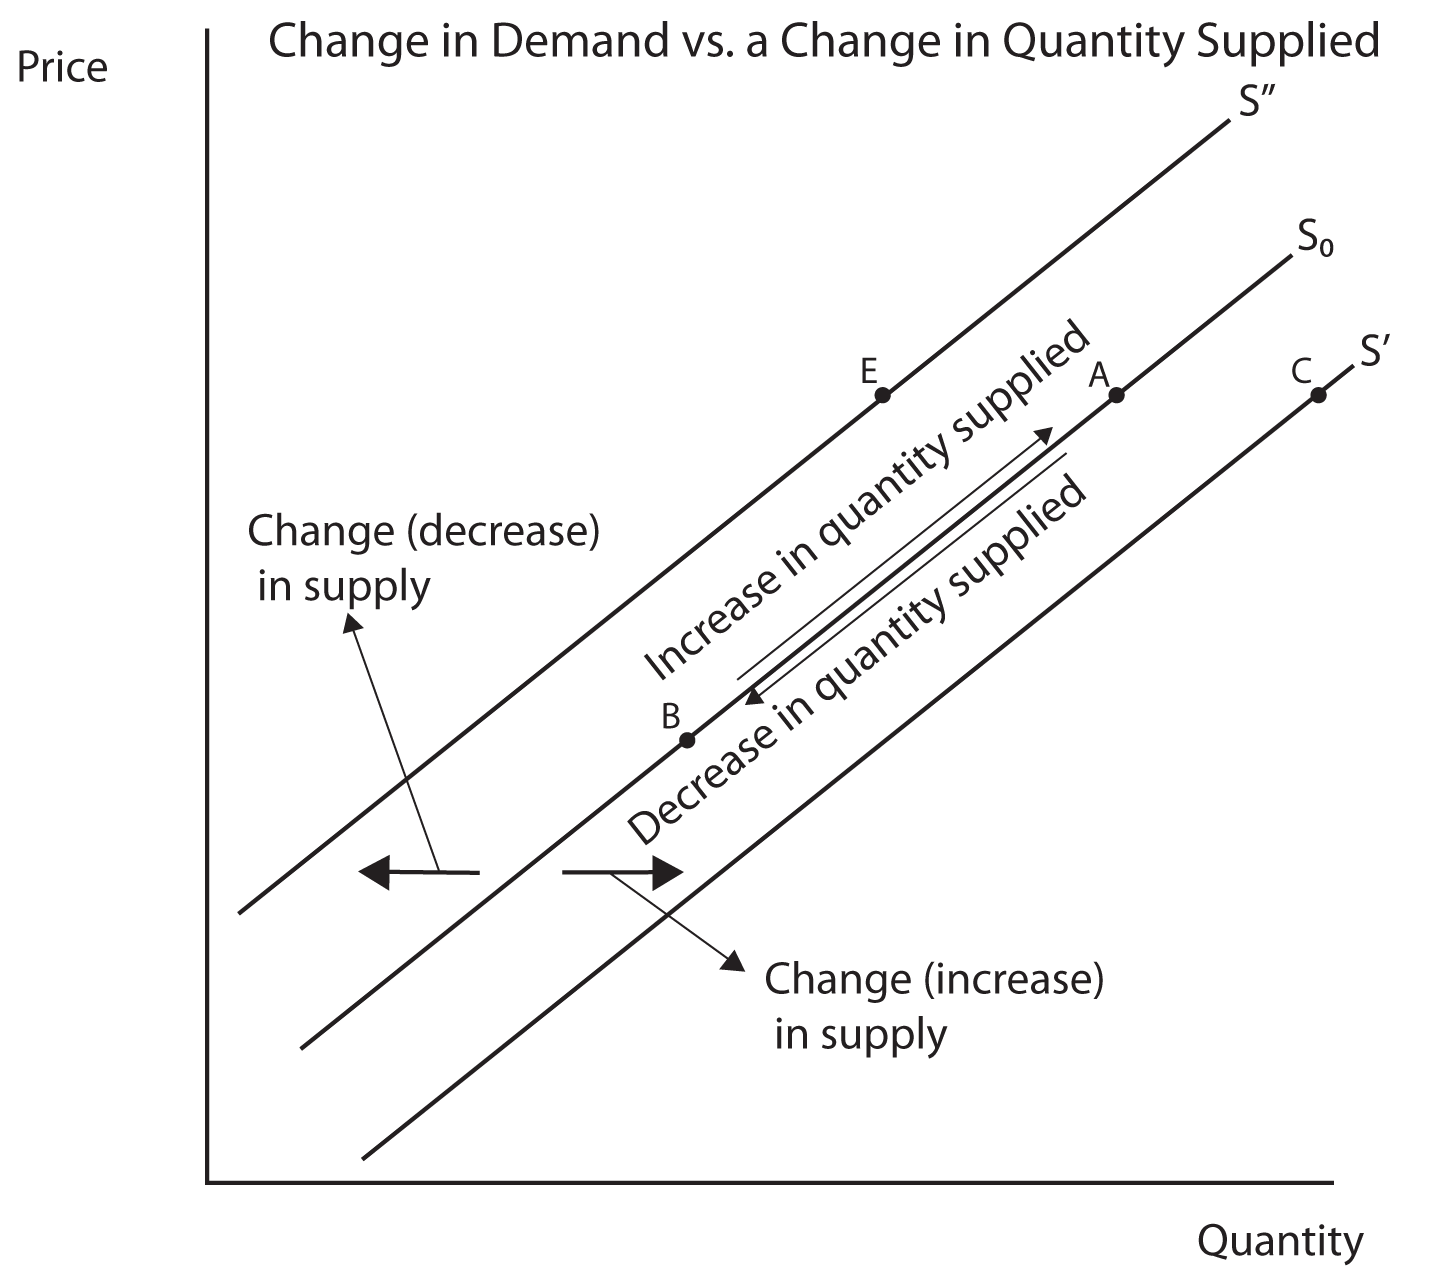 Description: Description: Image 1.11: Changes in Supply vs Changes in Quantity Supplied. This image shows a graph similar to the last, with Price on the Y axis and Quantity on the X axis.  A 45 degree line labeled D0 slopes upward from the origin.  A parallel line to its right is labeled S Prime (representing an increase in supply) and a parallel line to its left is labeled S Prime Prime (representing a decrease in supply).  Two points (A and B, A having the higher X and Y values) are labeled on line S0 and are connected by arrows going both directions.  The arrow from point A to B is labeled  Increase in quantity supplied  and the arrow from B to A is labeled  Decrease in quantity supplied. 